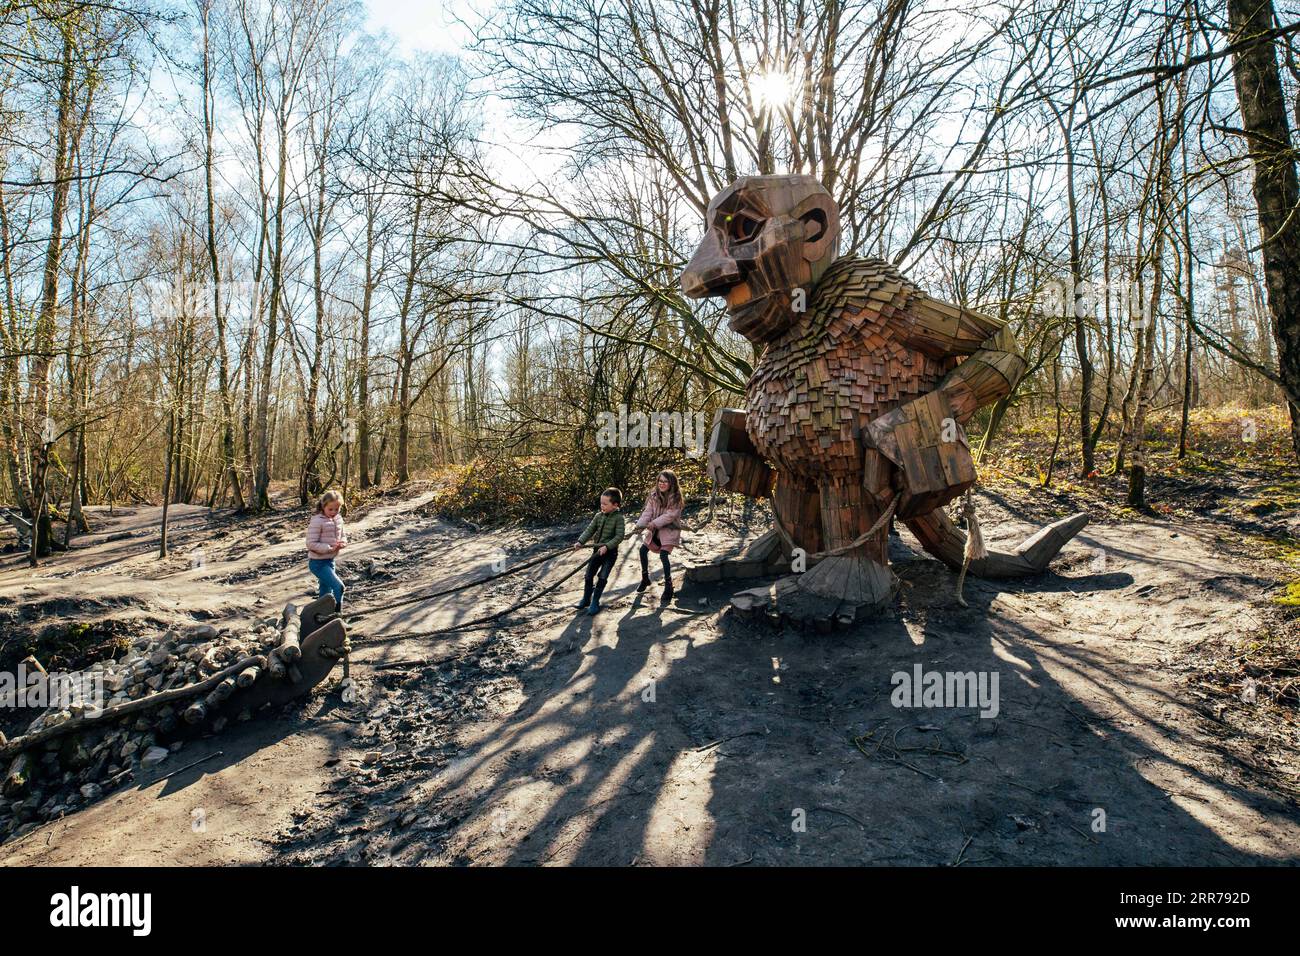 210321 -- BOOM, March 21, 2021 -- Children play with a troll at the De Schorre forest park in Boom, Belgium, March 20, 2021. Danish artist Thomas Dambo and his team built seven giant trolls from reclaimed wood at the De Schorre forest park in northern Belgium in 2019. These giant wooden sculptures are dotted around the forest. The United Nations General Assembly proclaimed March 21 as the International Day of Forests which celebrates and creates awareness on the importance of all types of forests and on the need to preserve and care for the world s woodlands. This year the theme for the Intern Stock Photo